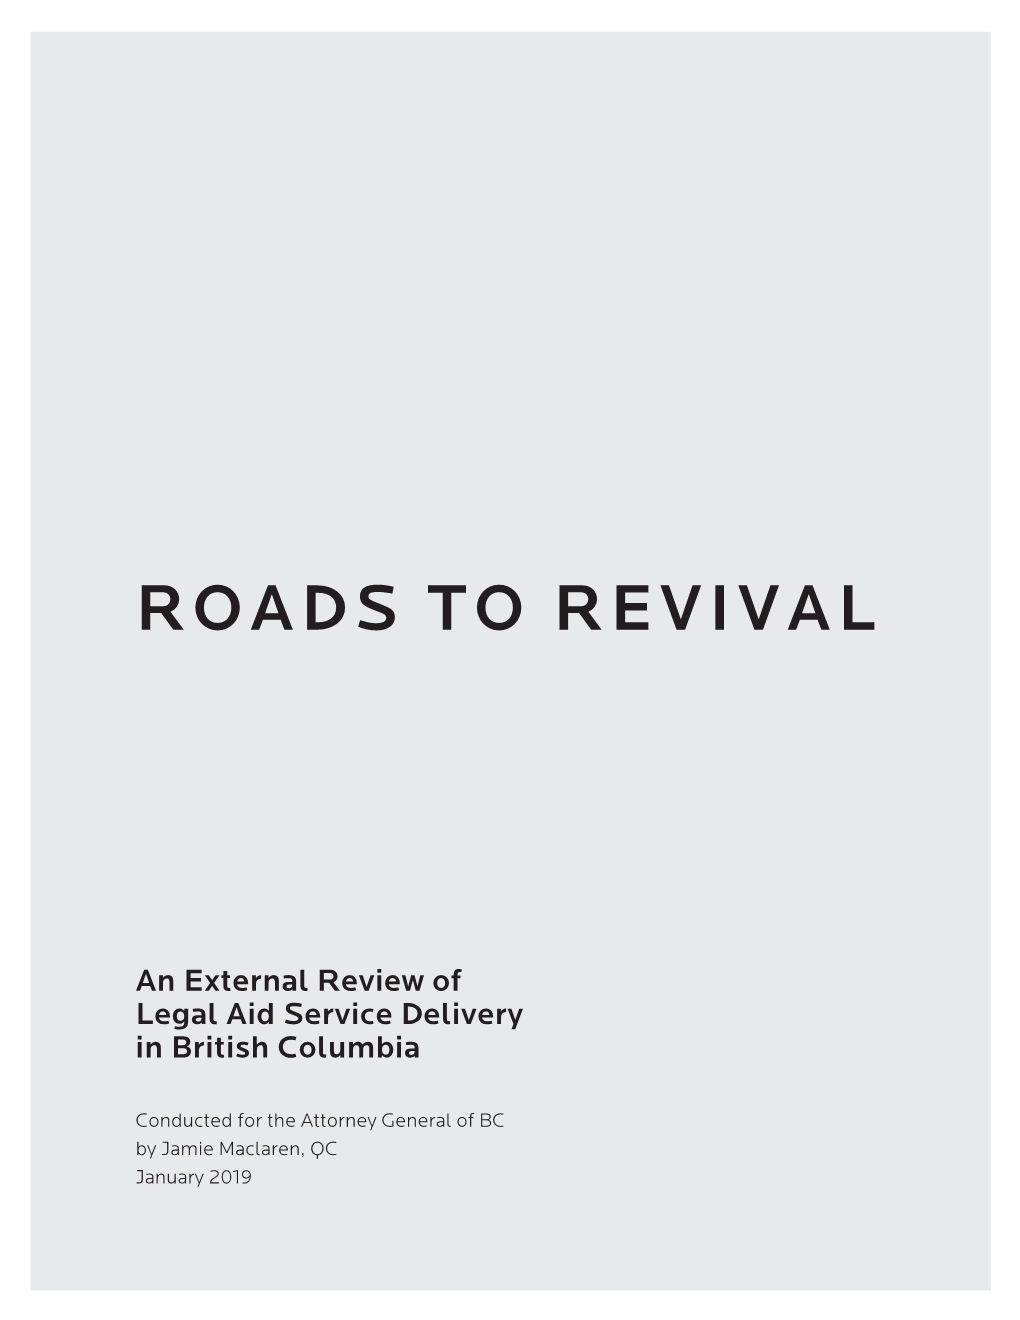 Roads to Revival